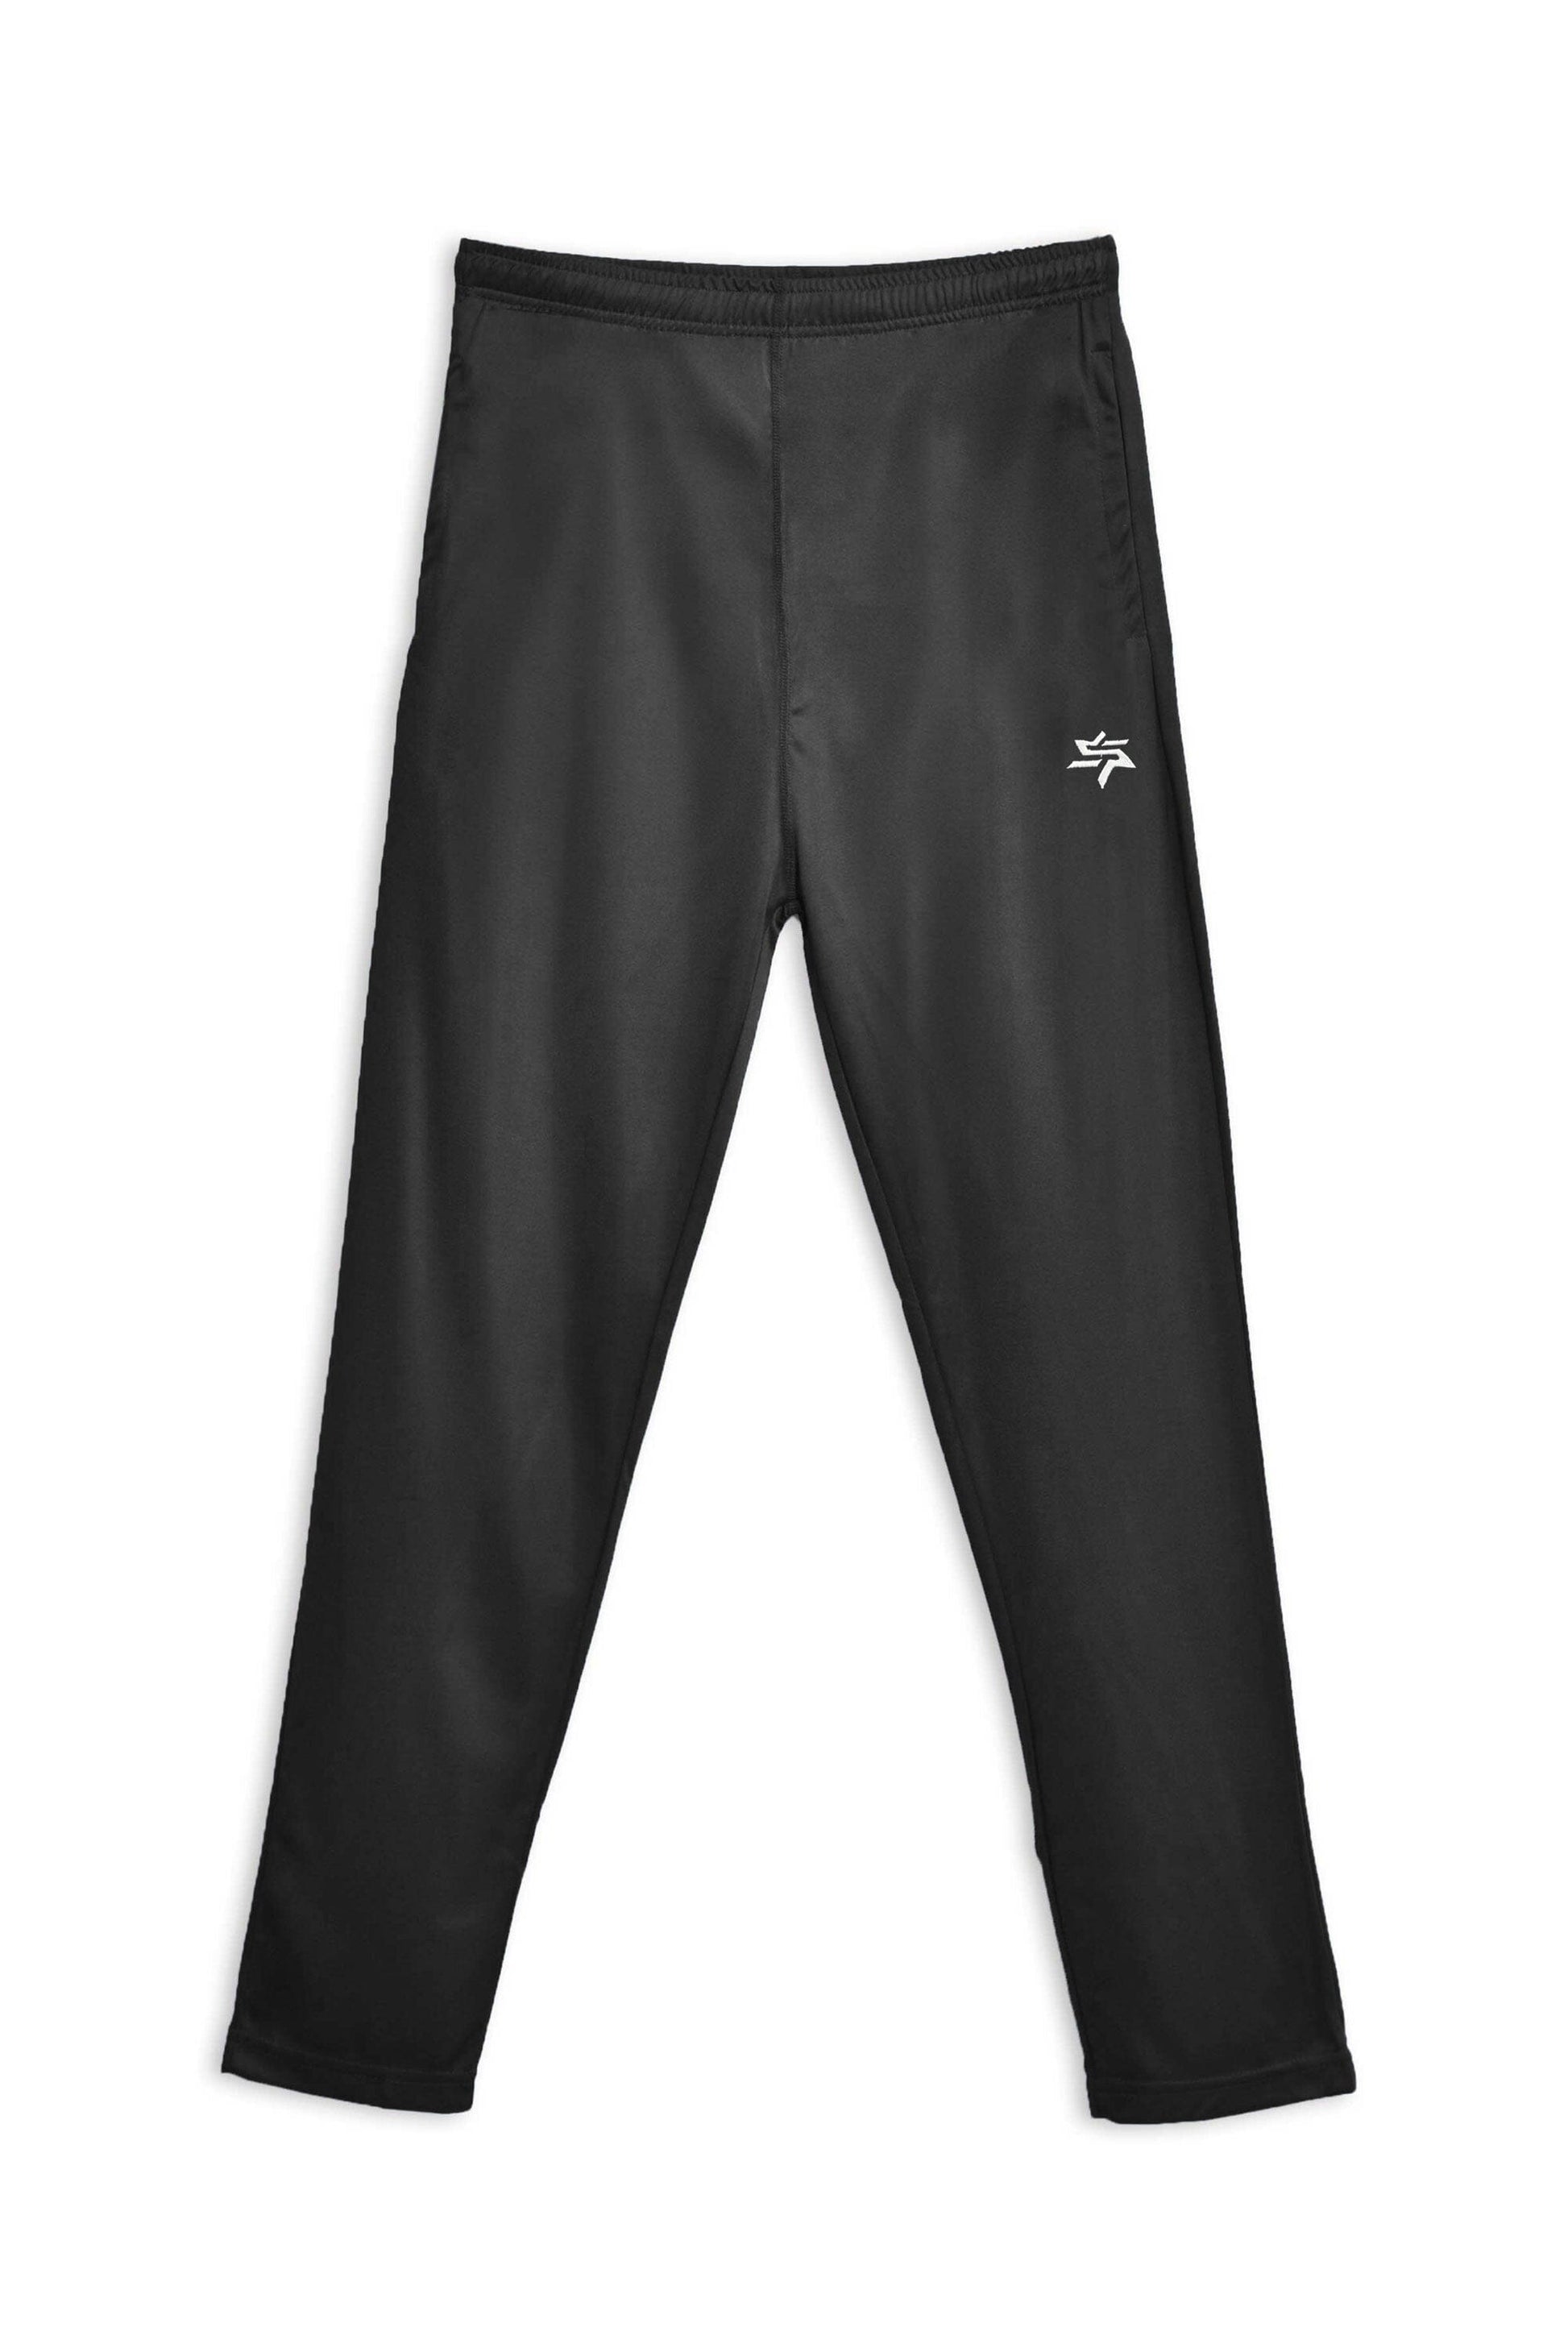 Men's Geraldton Embroidered Activewear Trousers